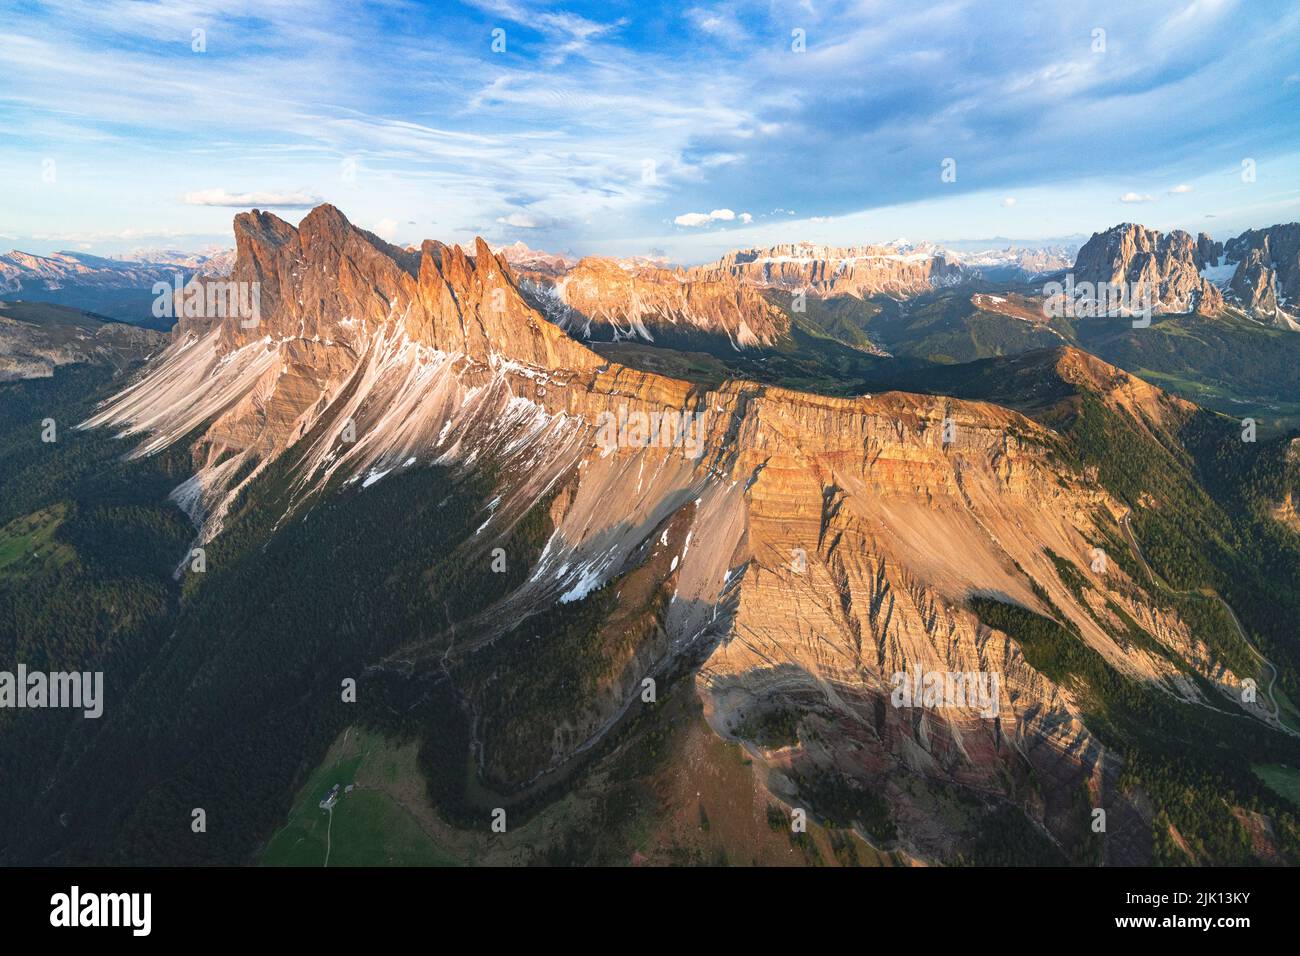 Aerial view of Odle group, Seceda, Sella and Sassolungo at sunset, Dolomites, South Tyrol, Italy, Europe Stock Photo